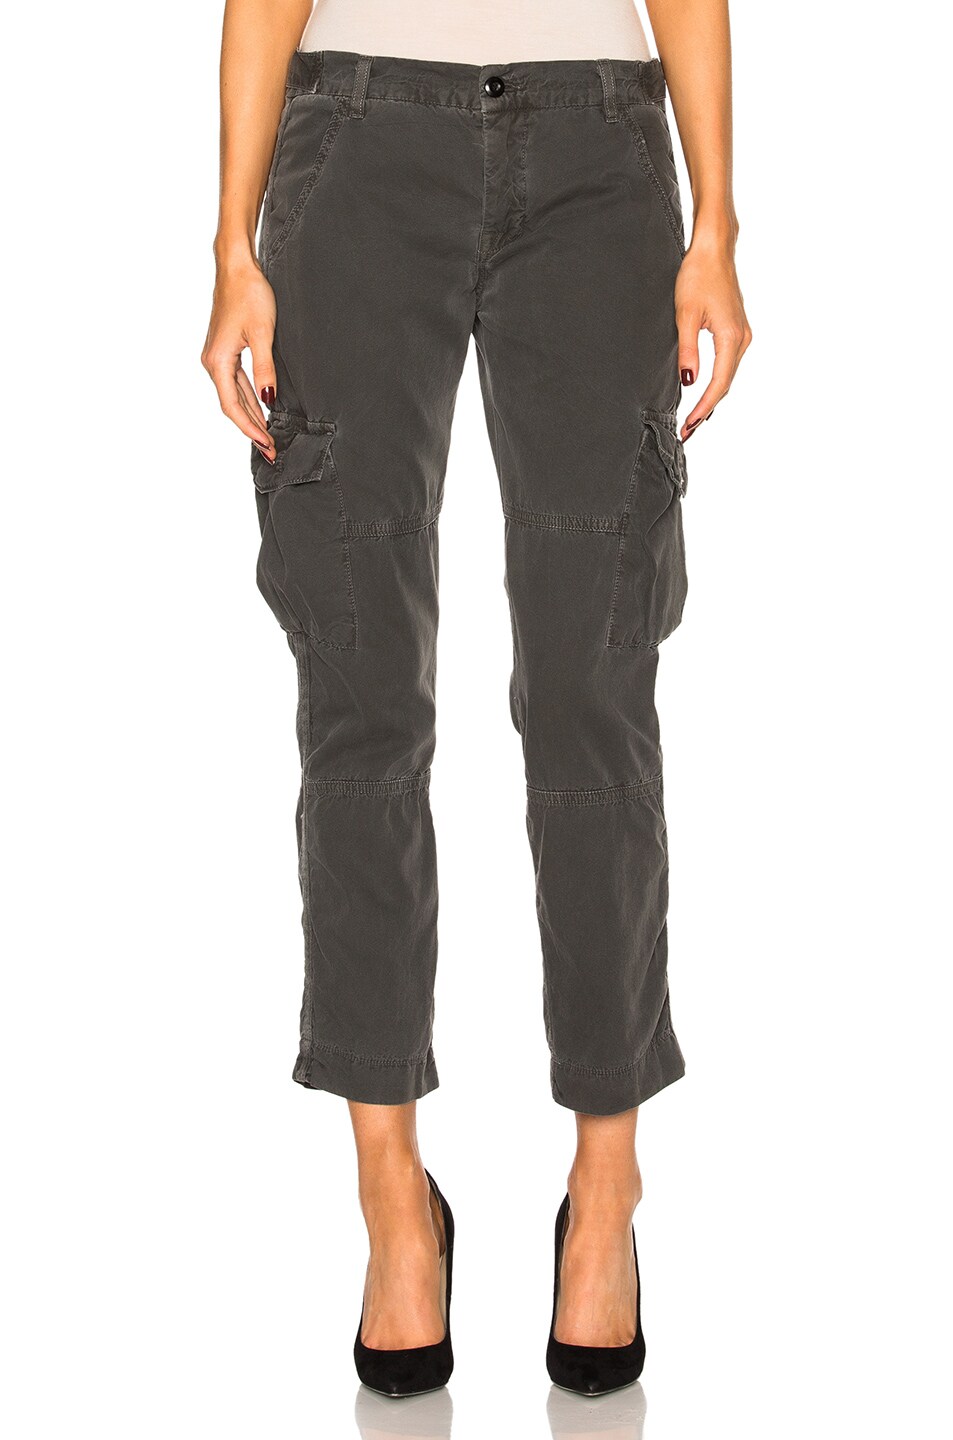 Image 1 of NSF All Day NSF Basquiat Pant in Pigment Black